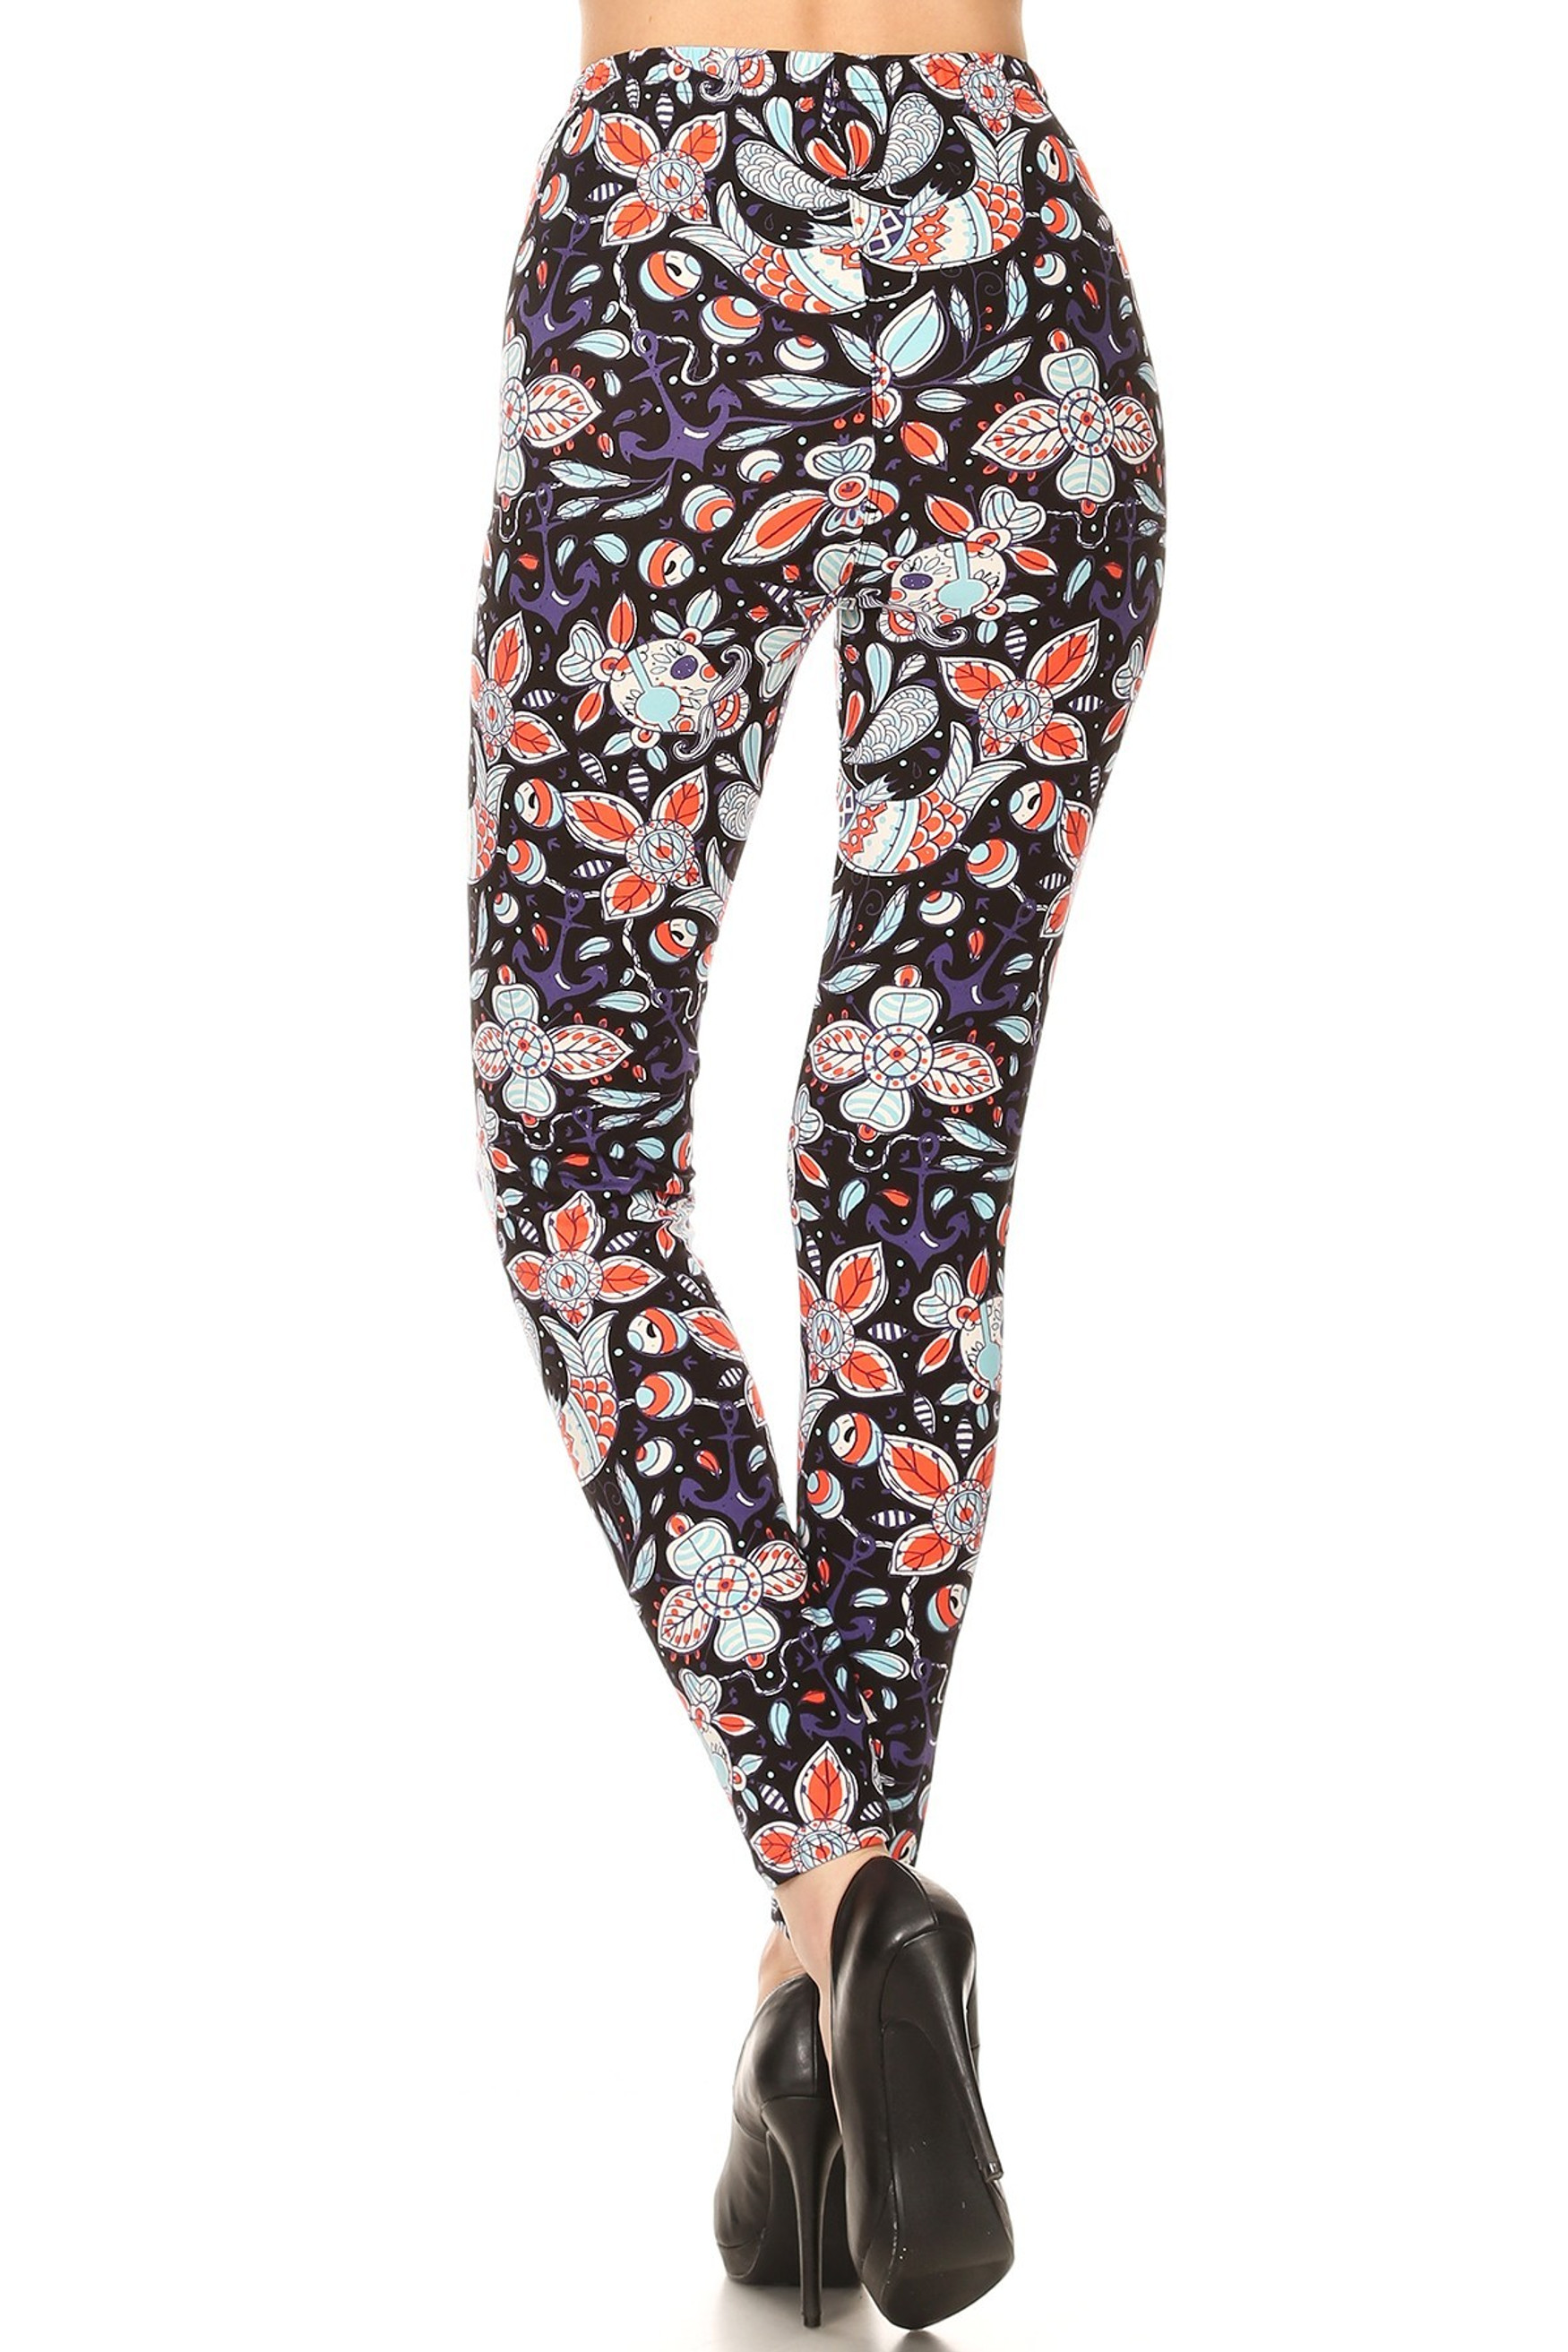 Buttery Soft Nautical Floral Skull Plus Size Leggings